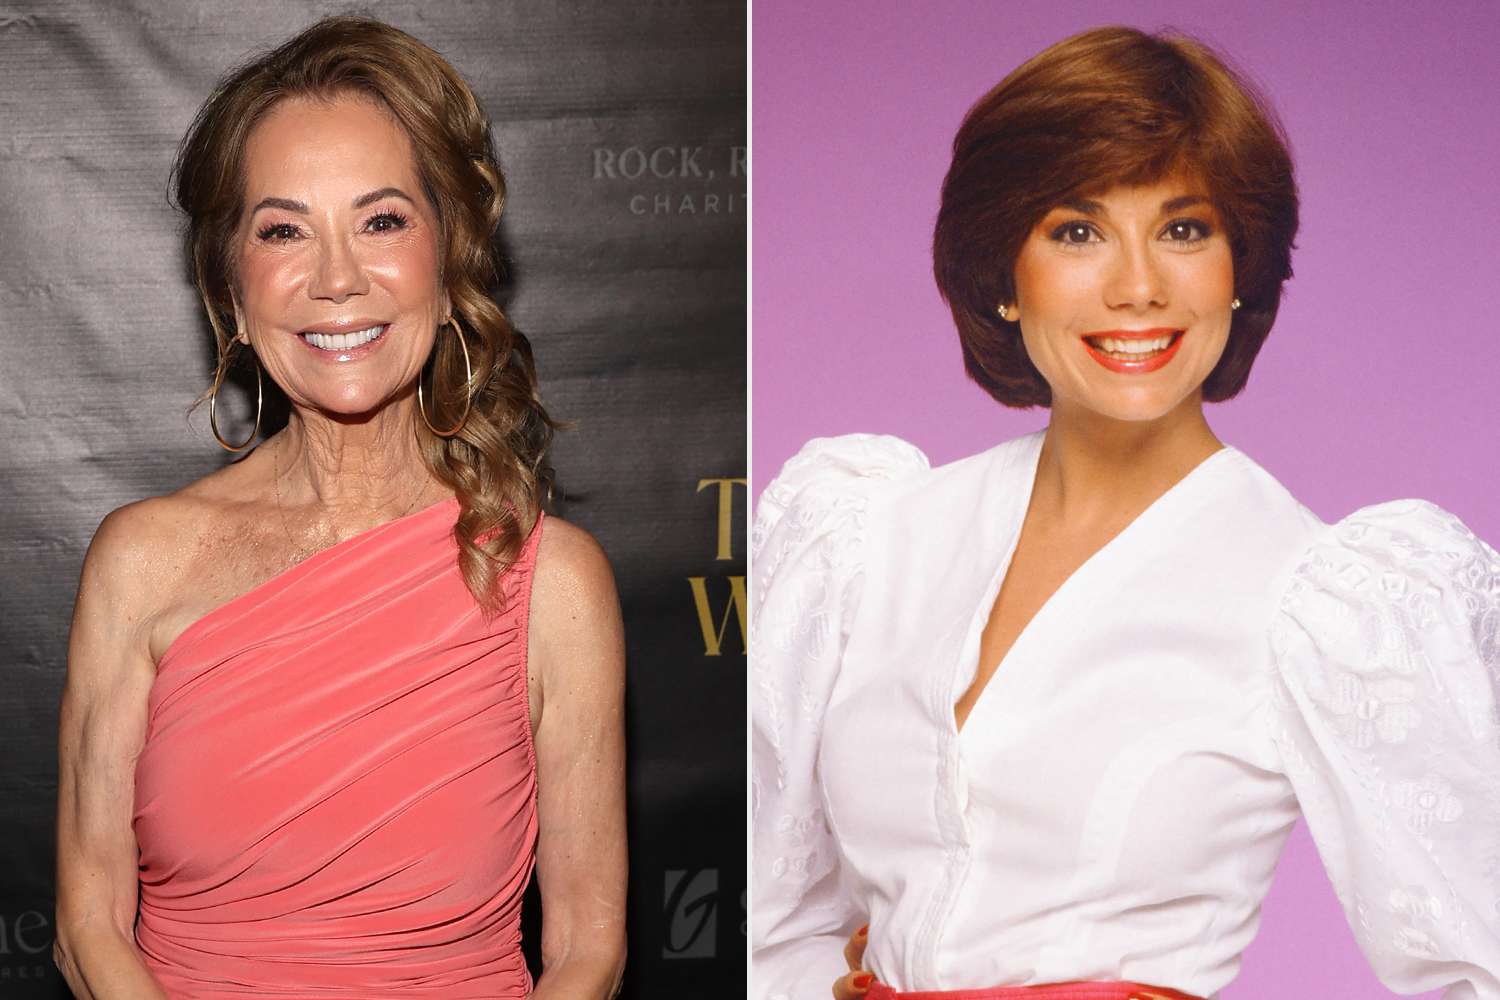 Kathie Lee Gifford Recalls 'Cruel' Casting Agent Telling Her She Wasn't Pretty Enough For “Charlie's Angels ”...